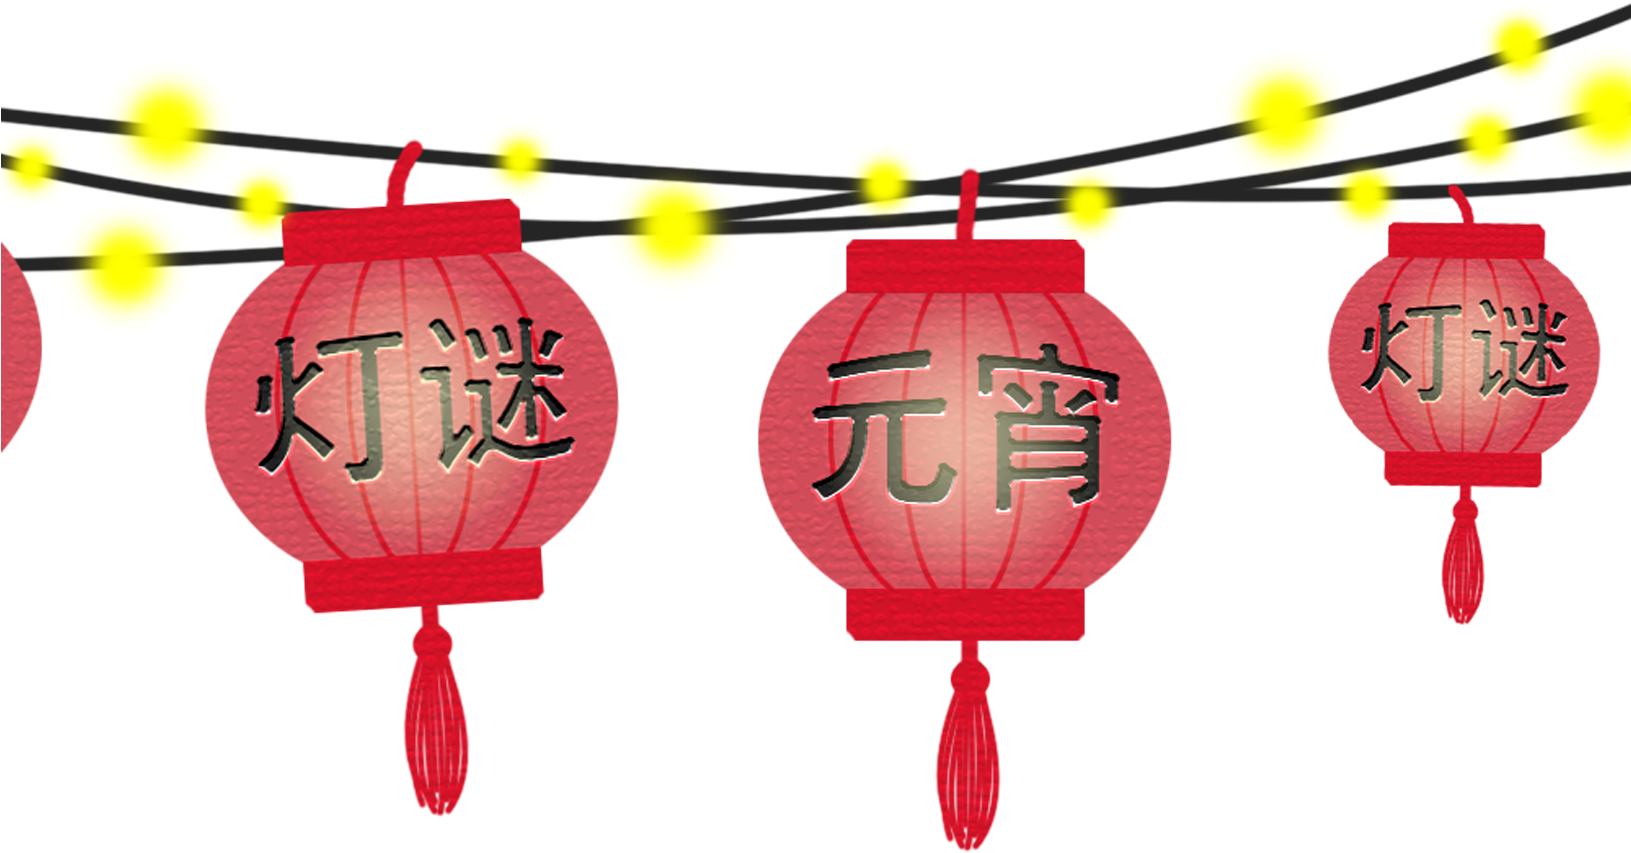 Lantern Festival Guessing Riddles Png Image And Clipart - Lantern (1630x1630)